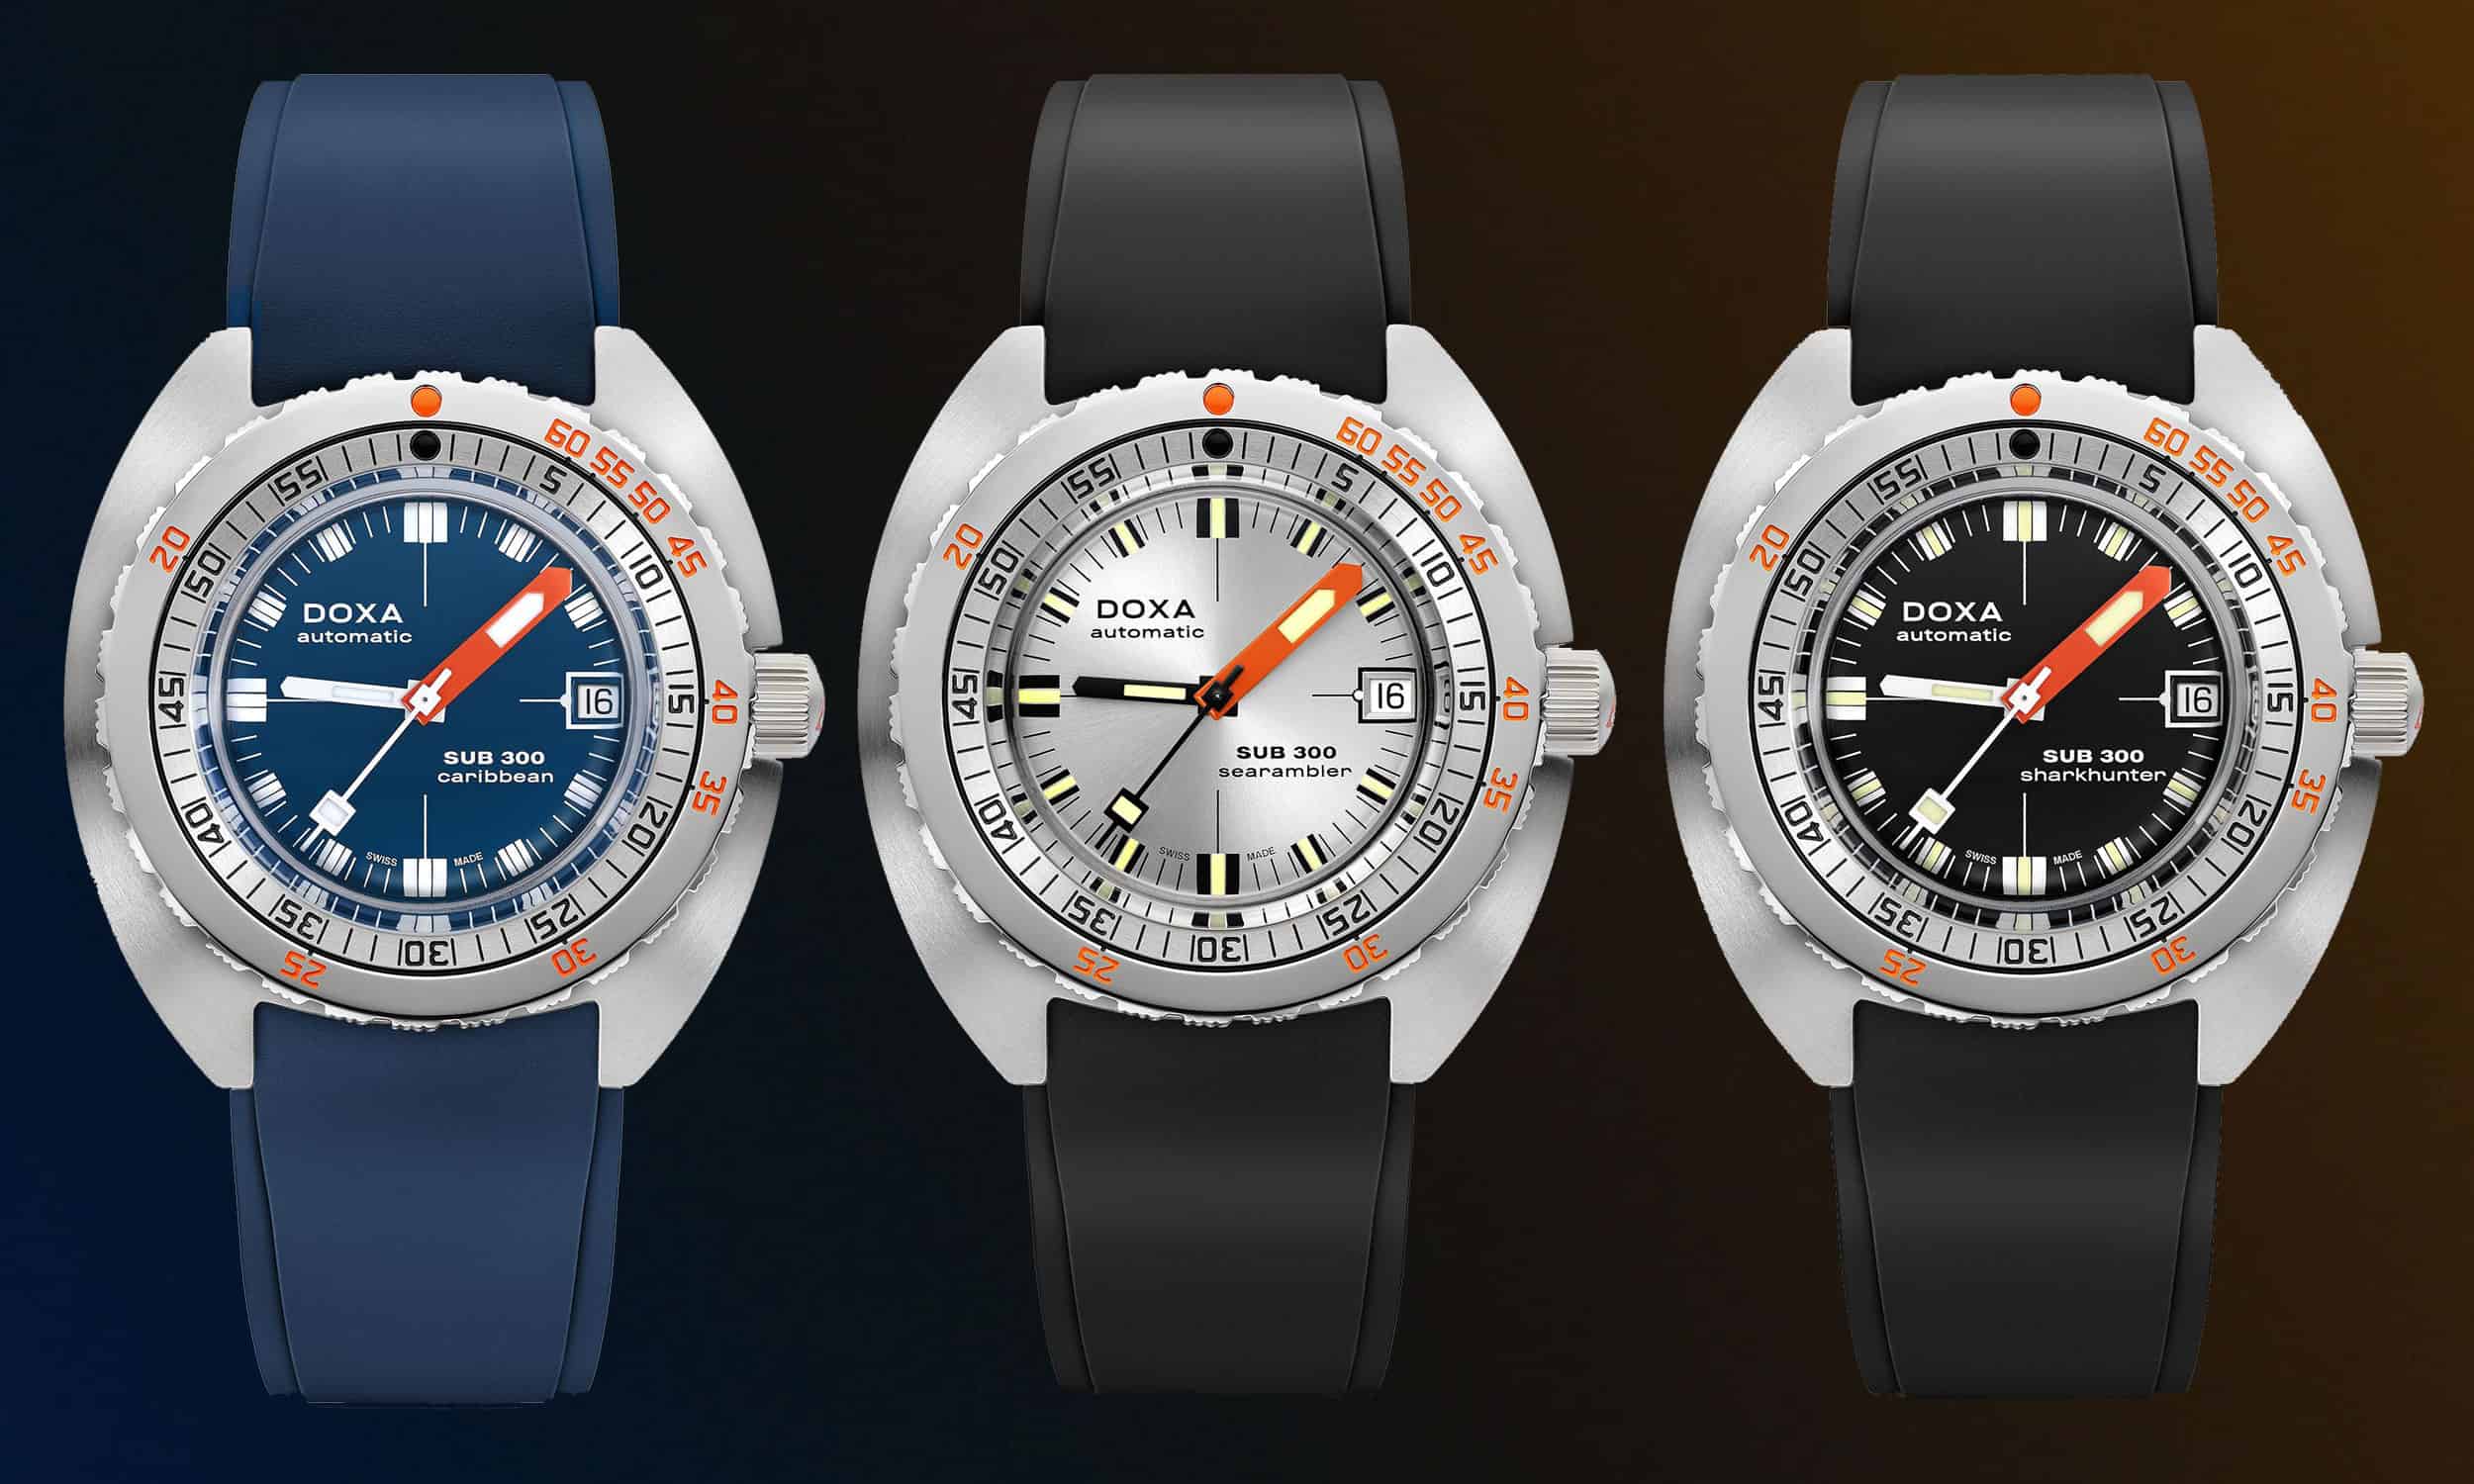 The Doxa SUB 300T Slim, colourful and COSC certified